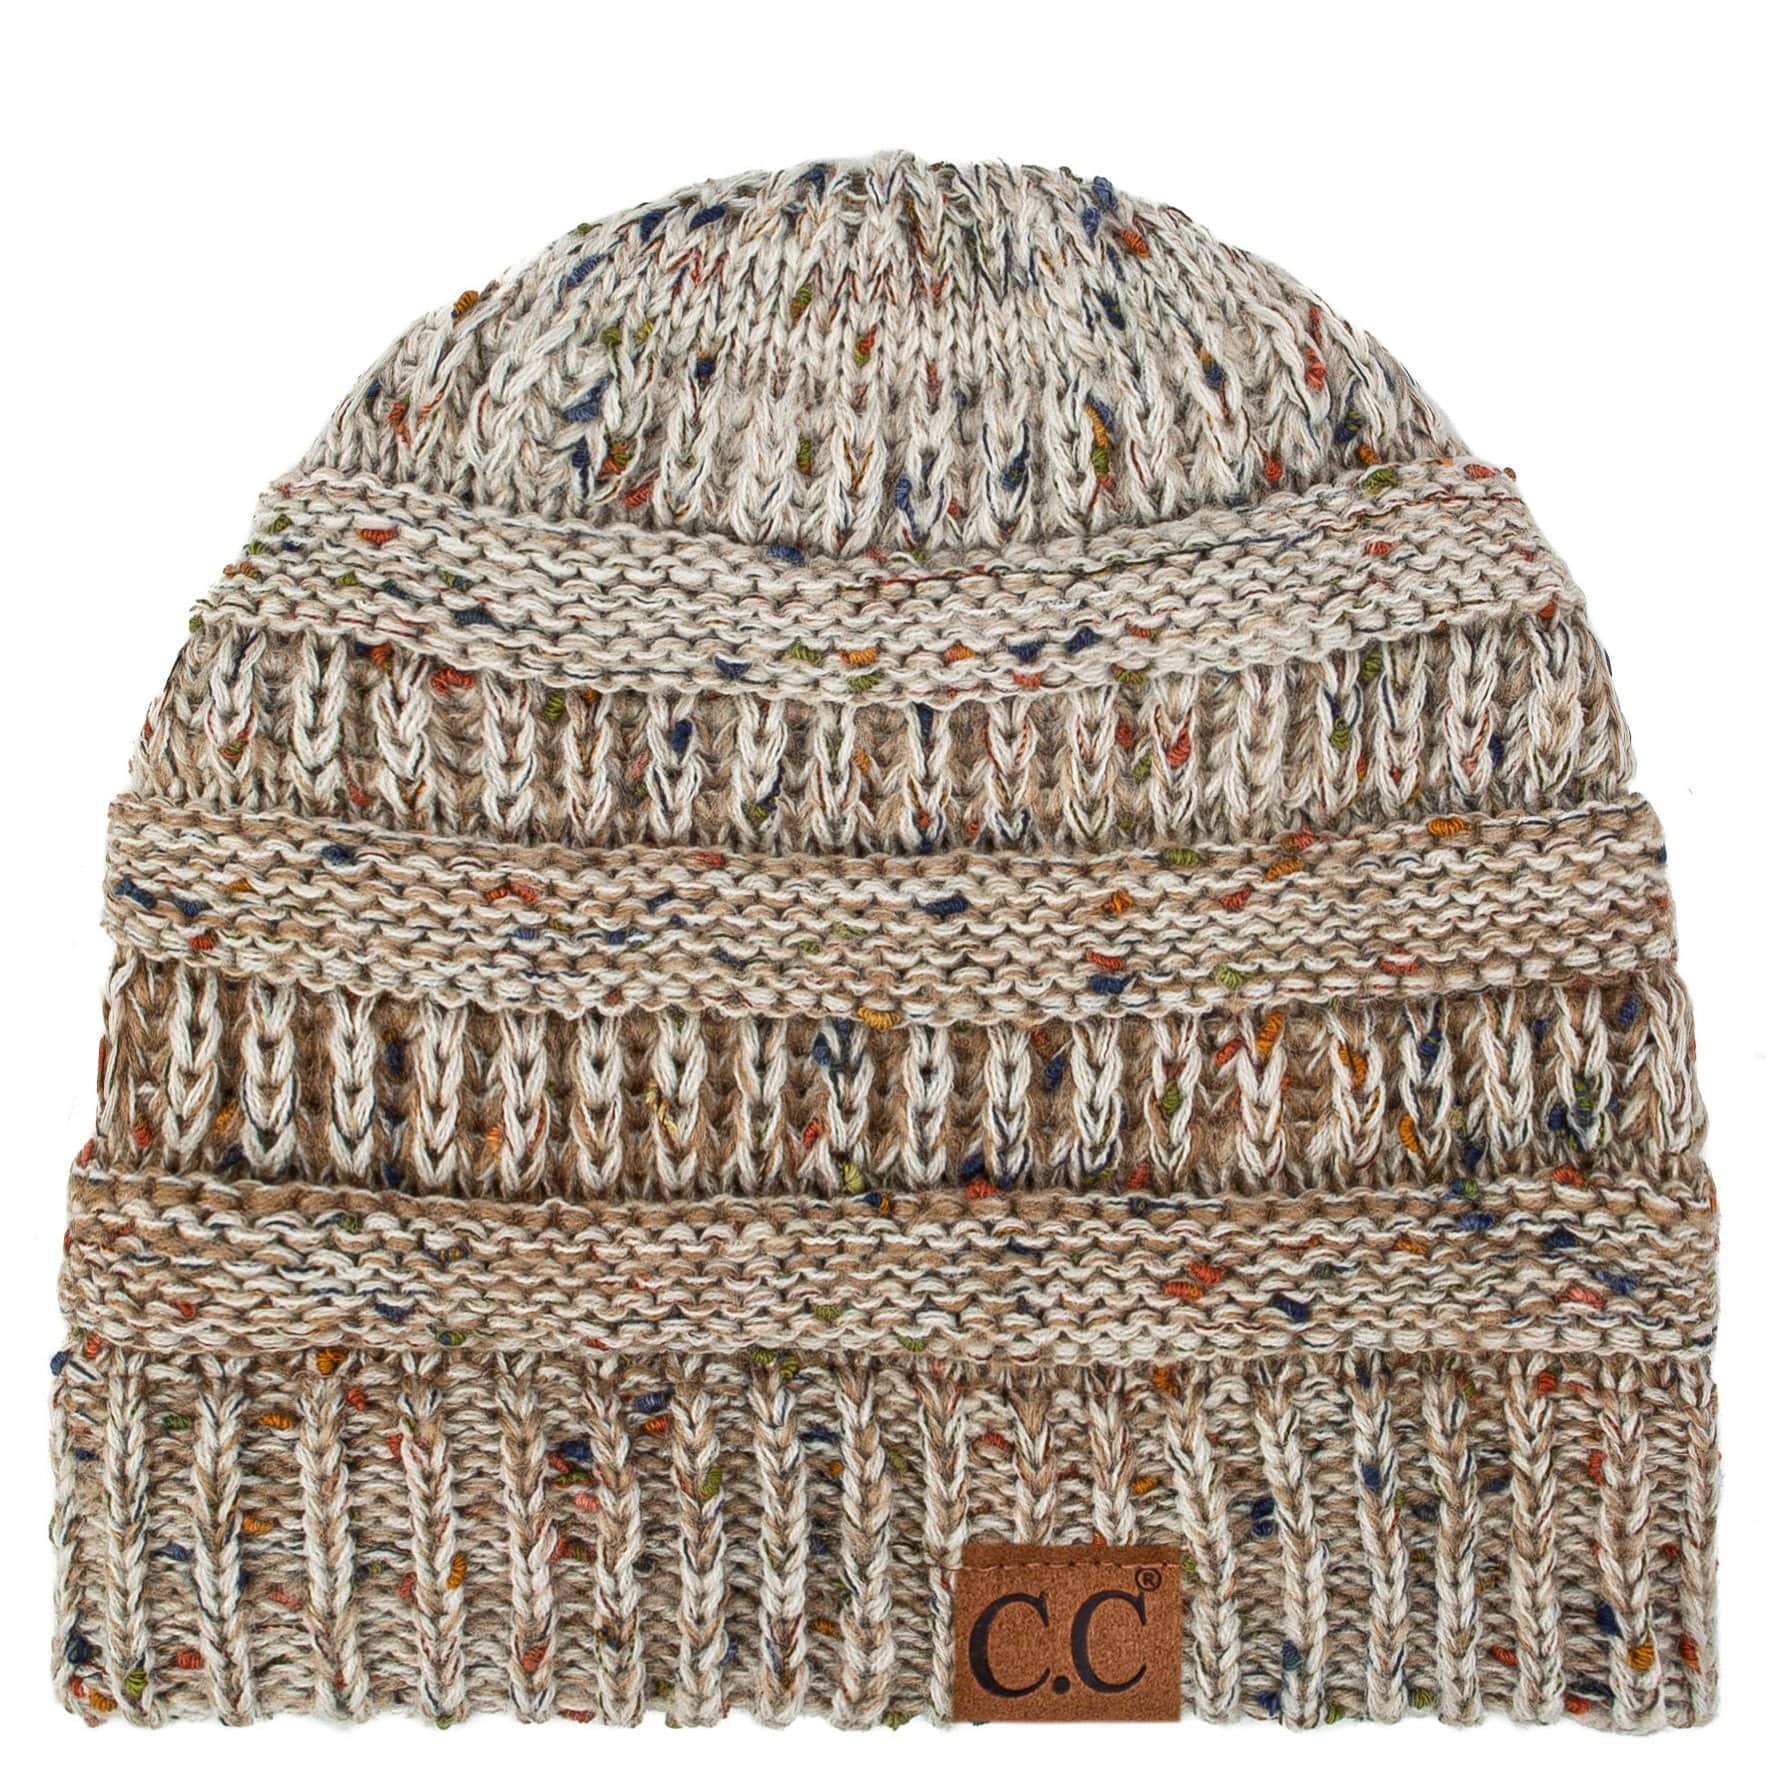 C.C Apparel Ombre Oatmeal C.C Trendy Warm Chunky Soft Stretch Ombre Cable Knit Beanie Skully